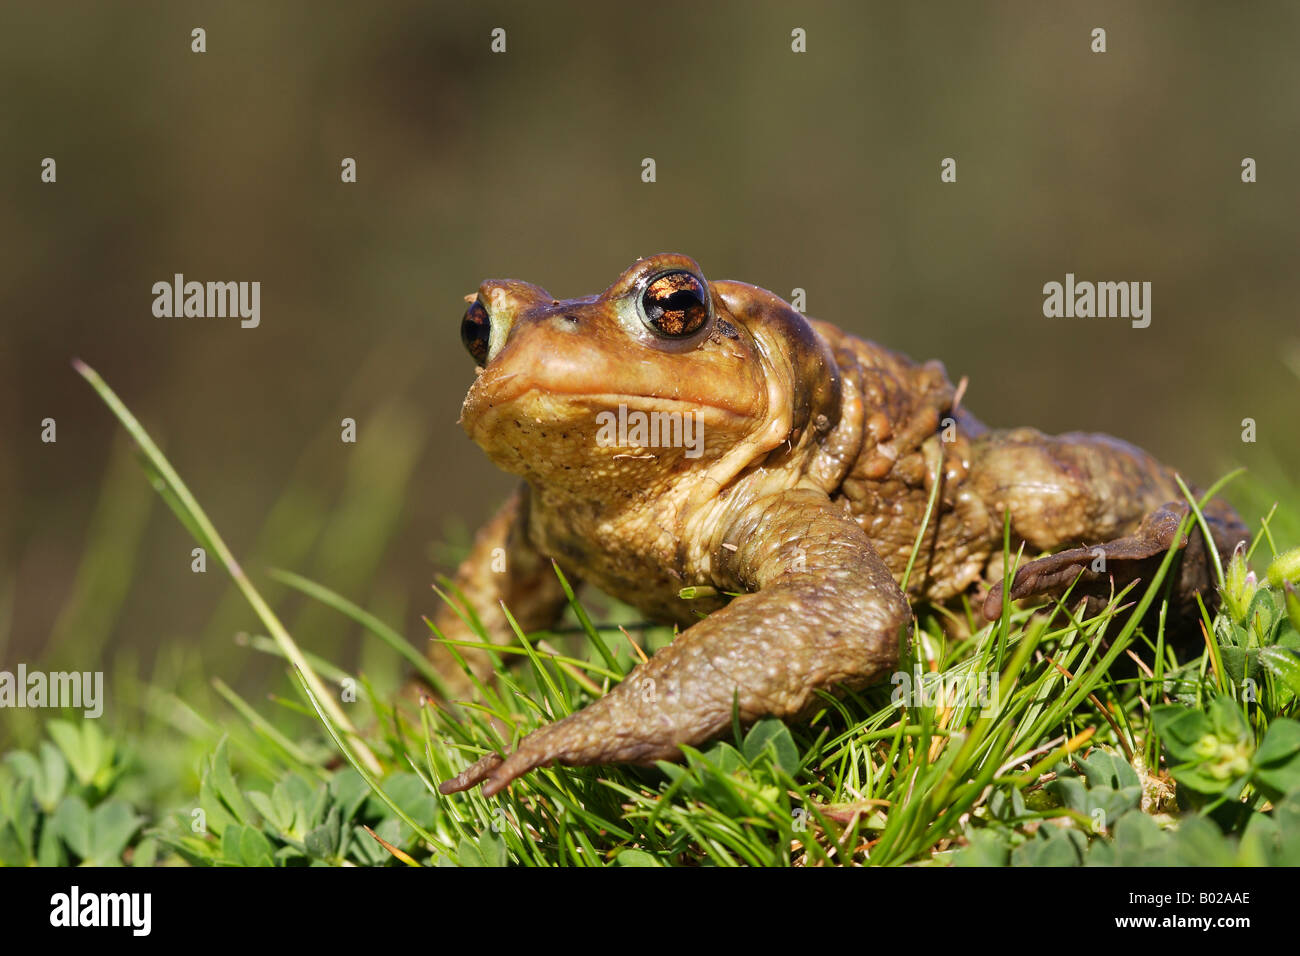 Common Toad (Bufo bufo) on grass Stock Photo